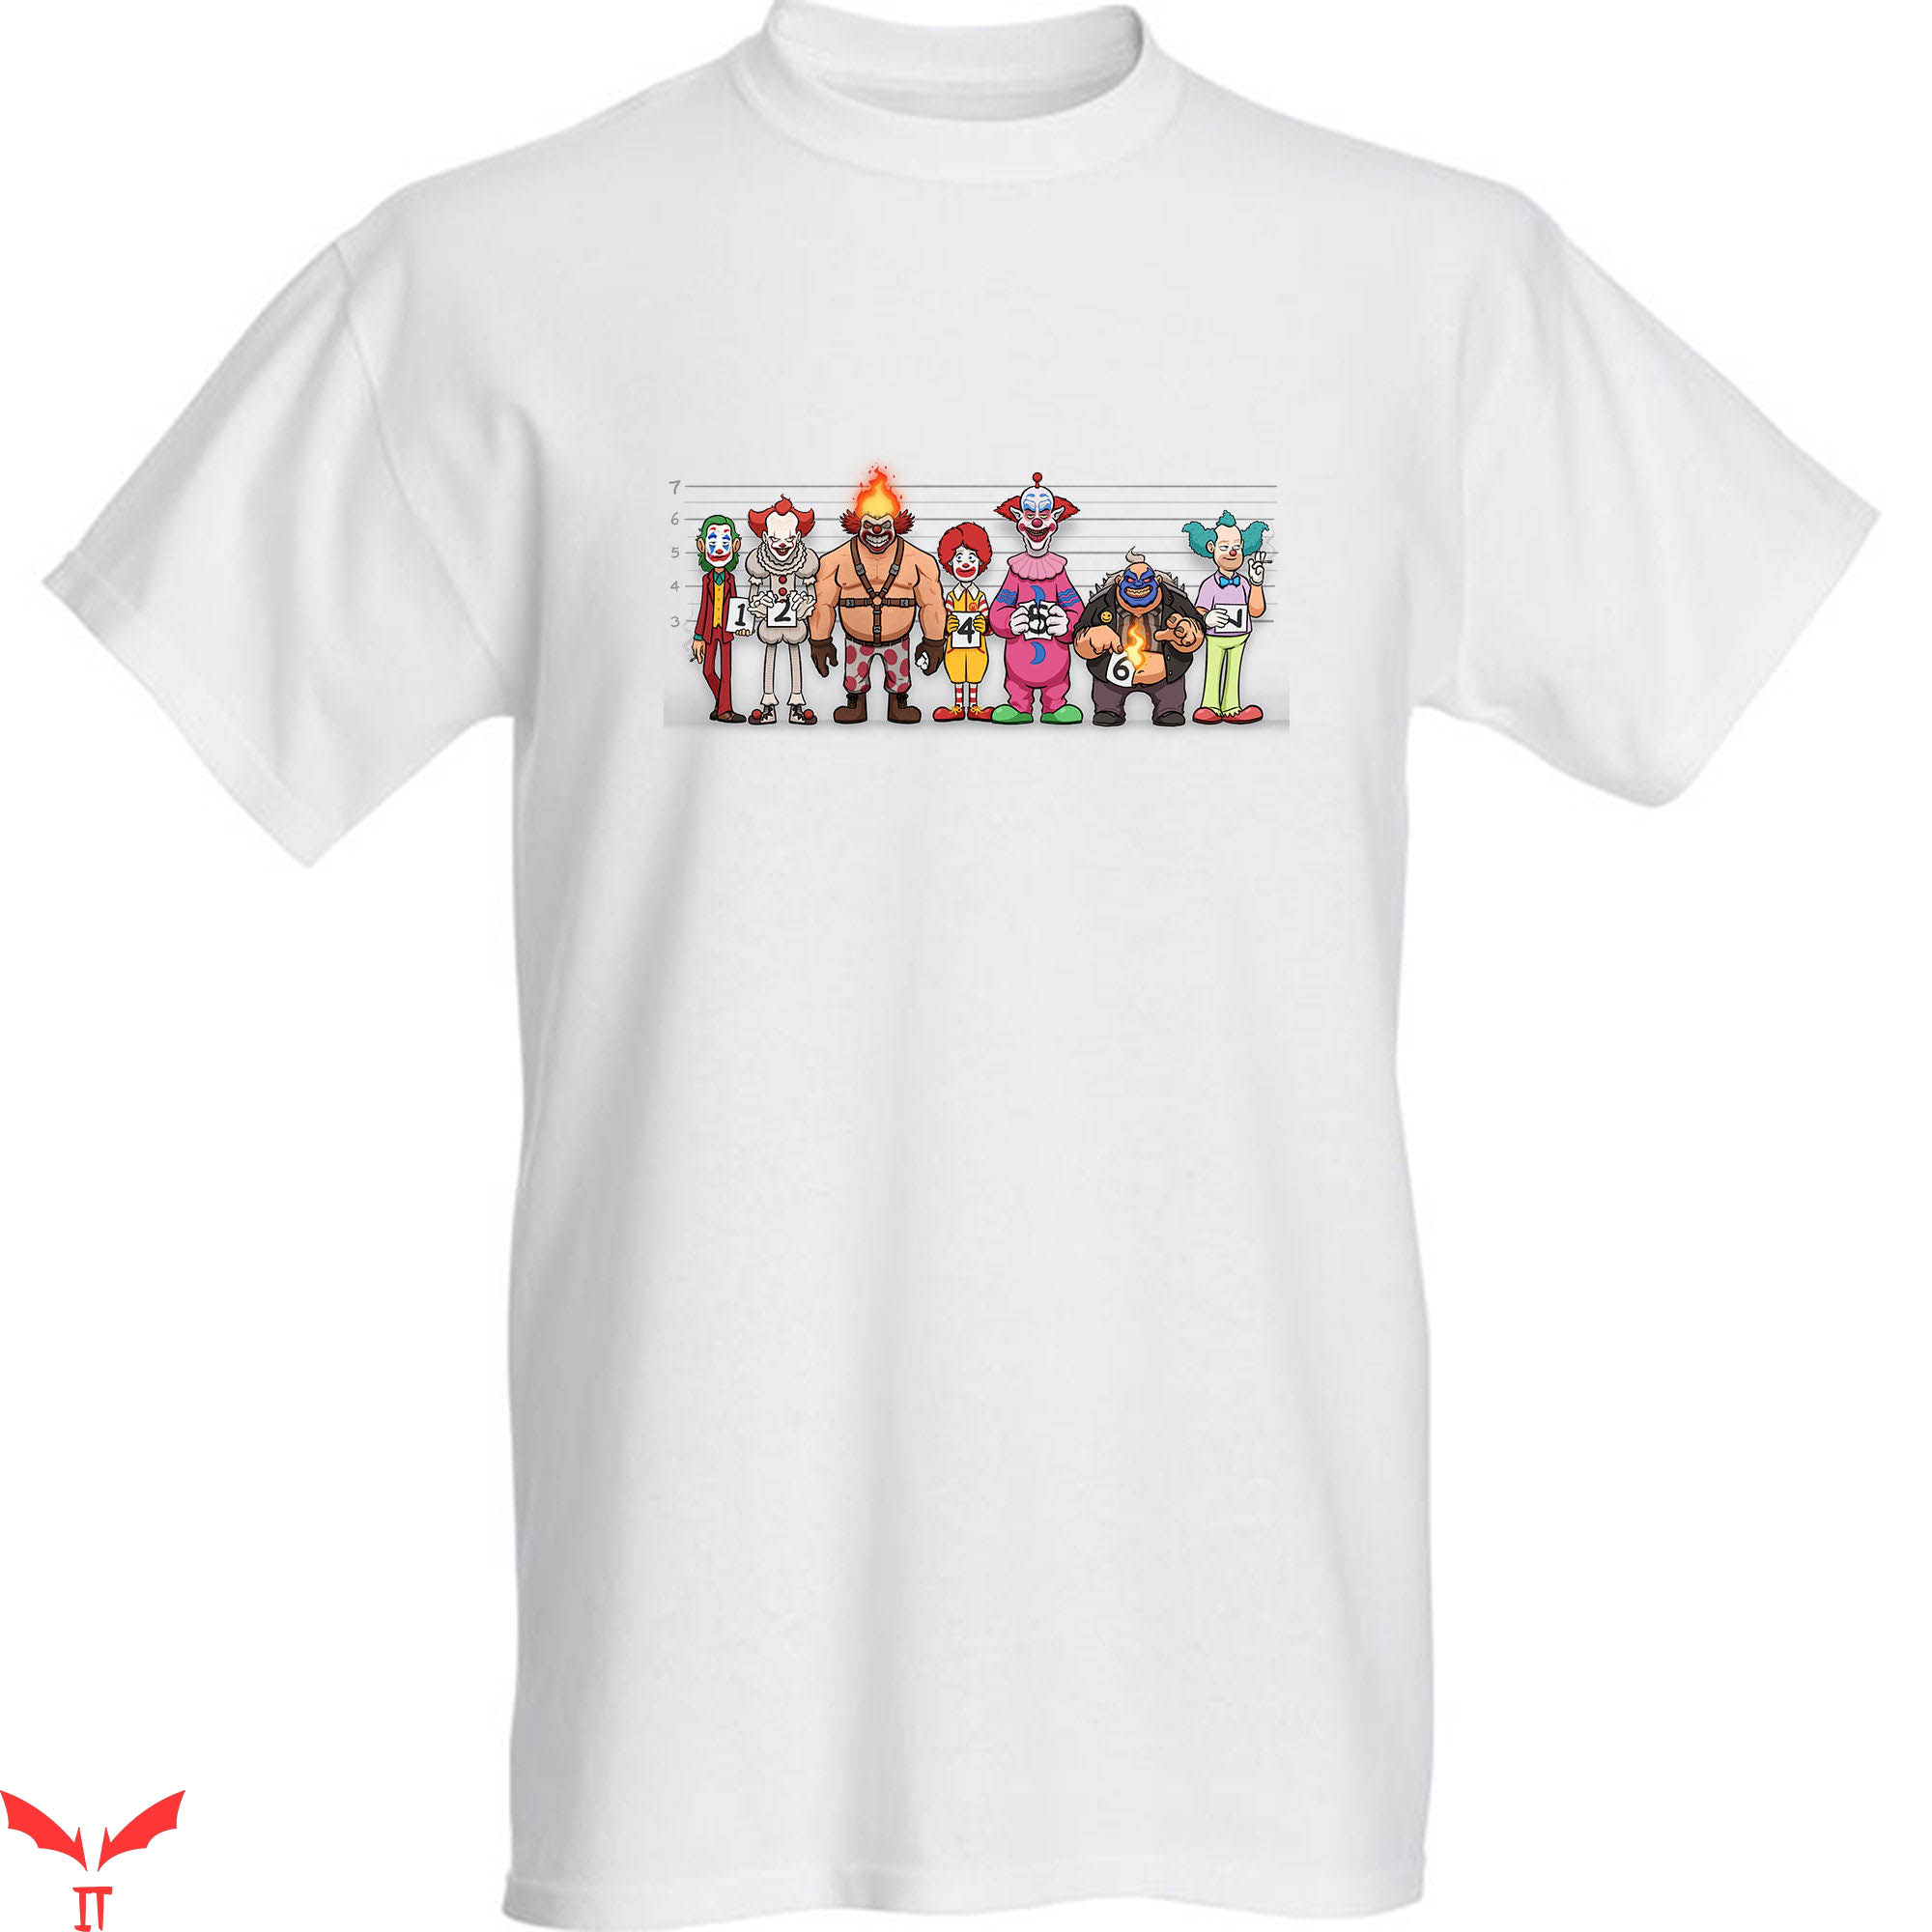 IT The Clown T-Shirt Crossover Send In The Clowns